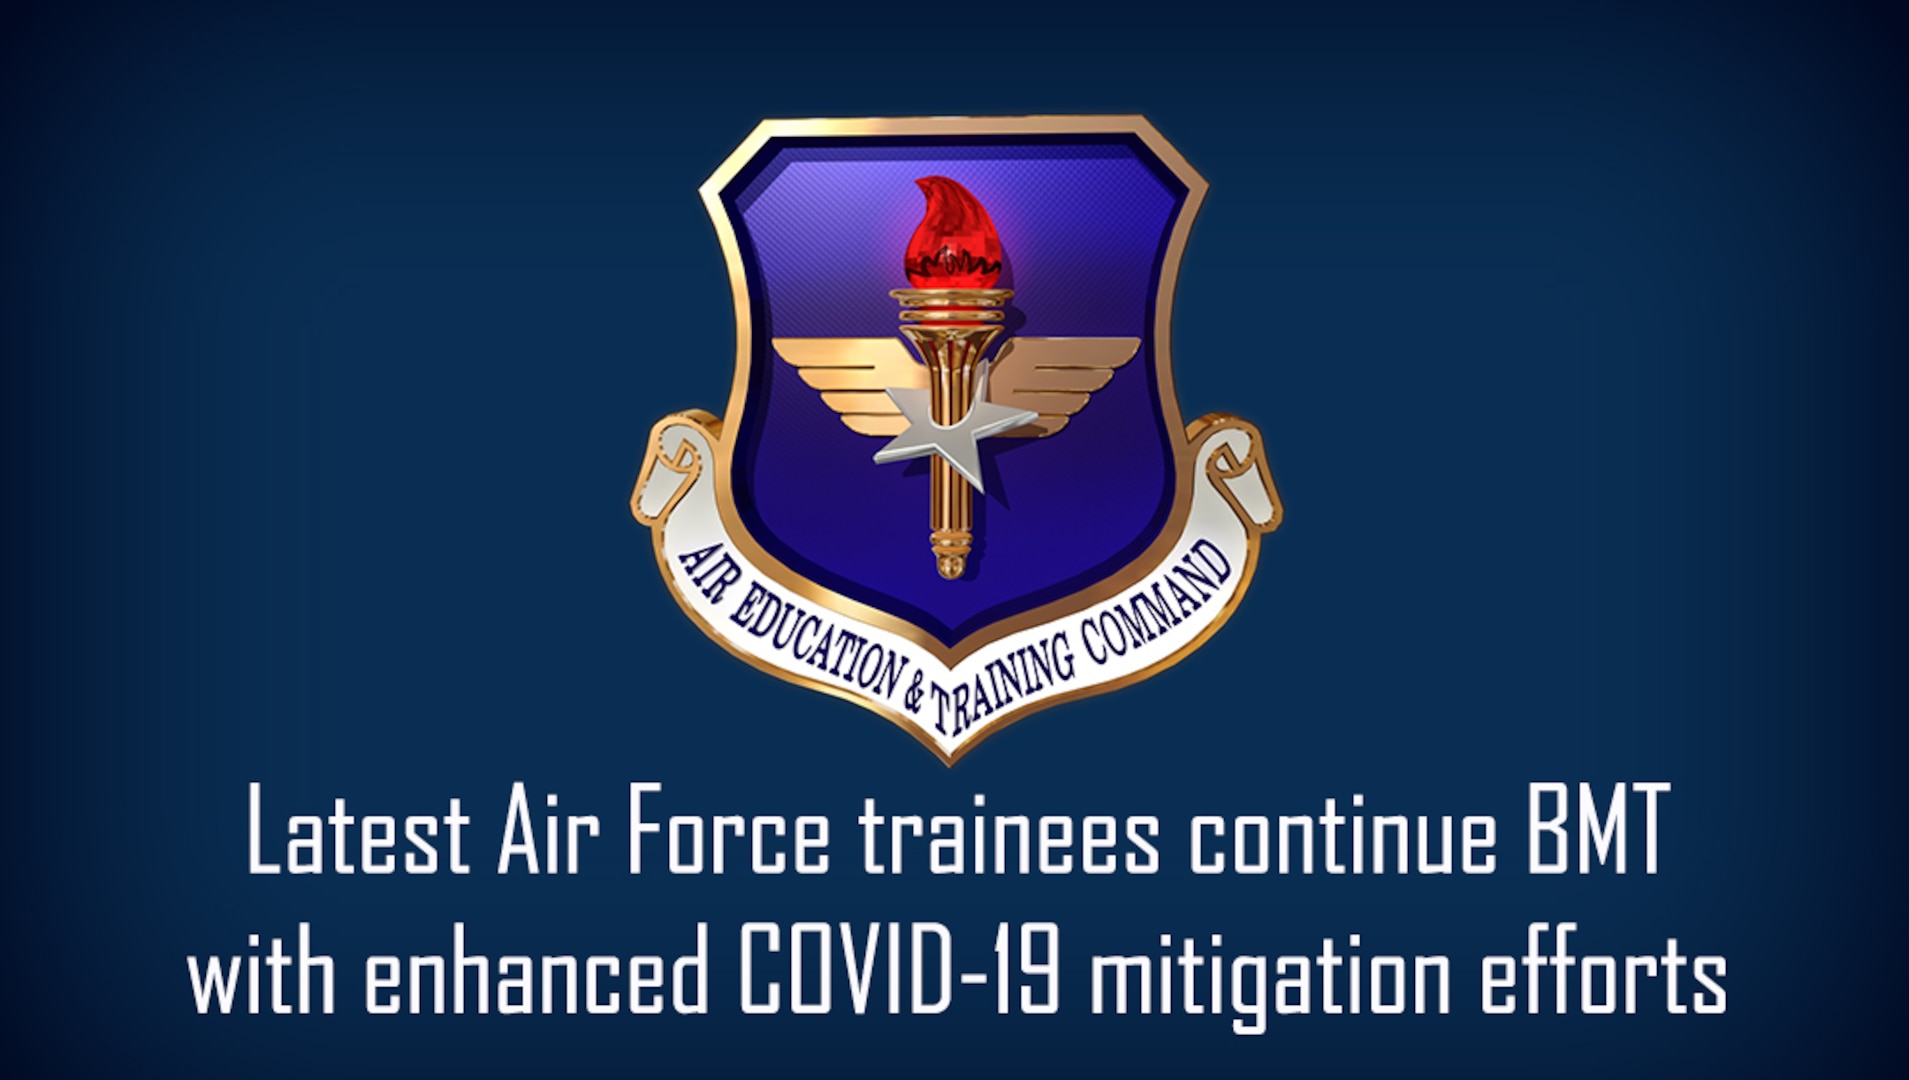 Latest Air Force trainees continue BMT with enhanced mitigation efforts